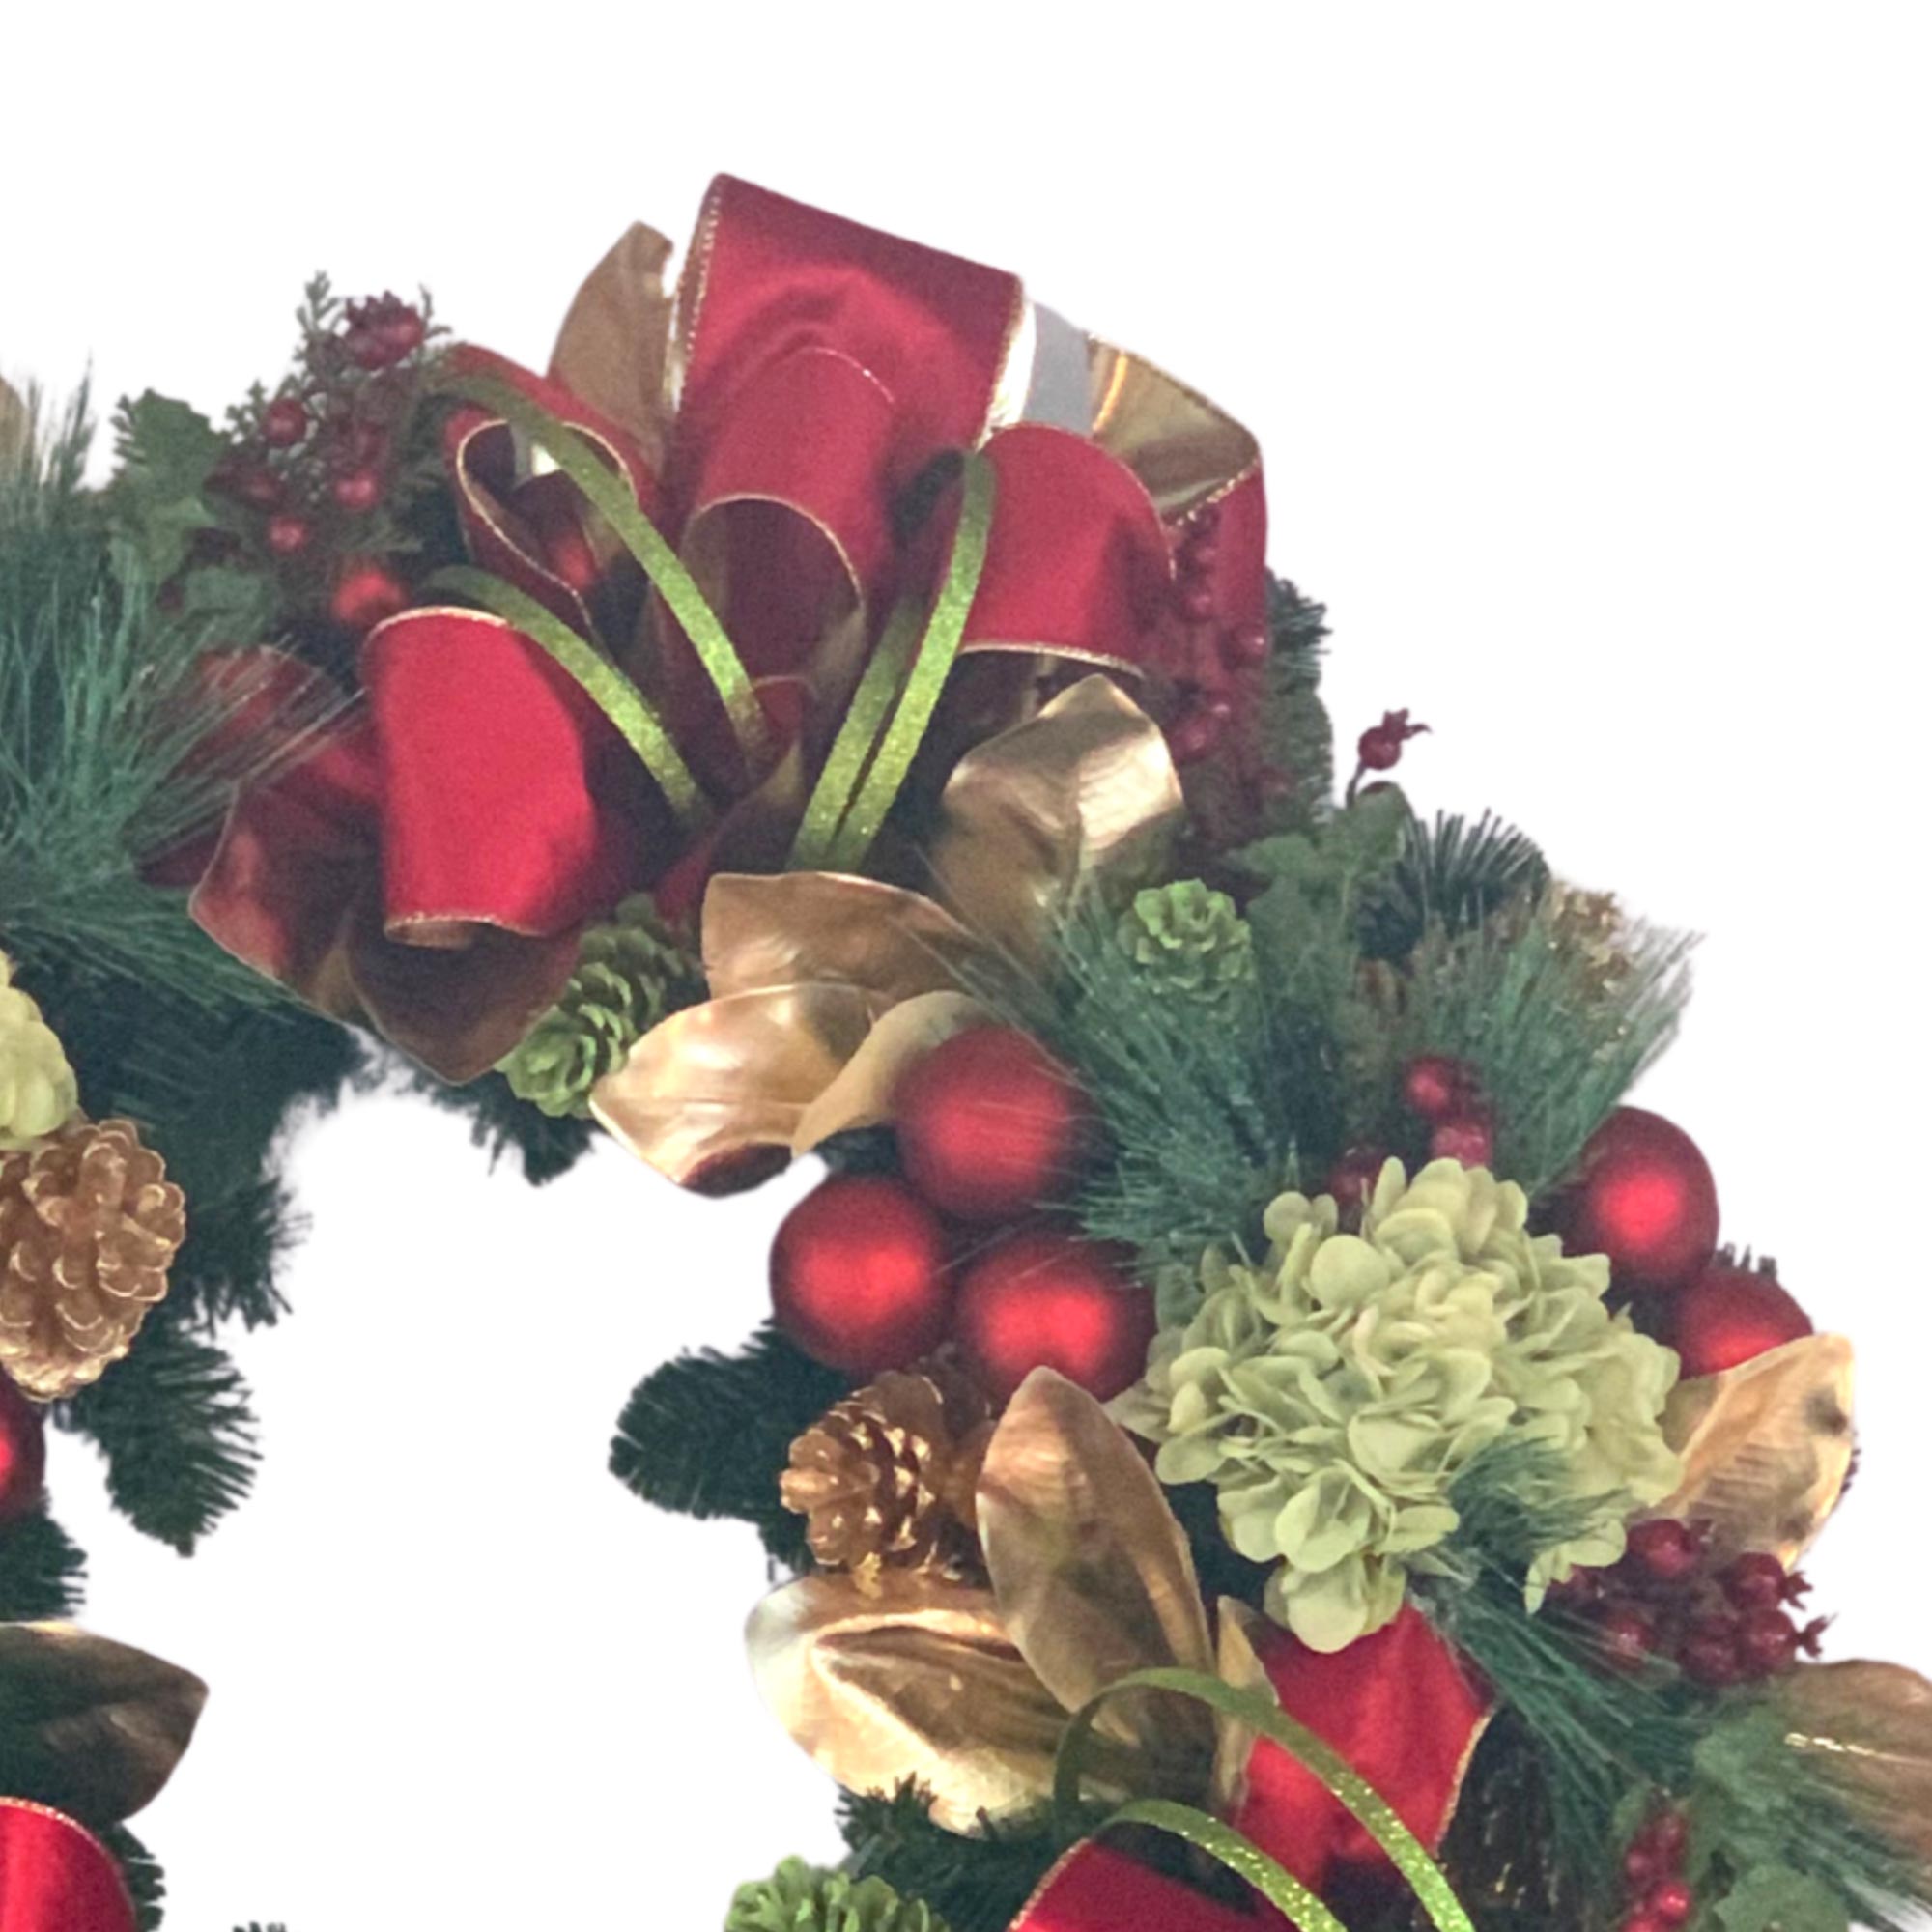 Creative Displays 32" Holiday Wreath with Hydrangea, Ornaments and Bows